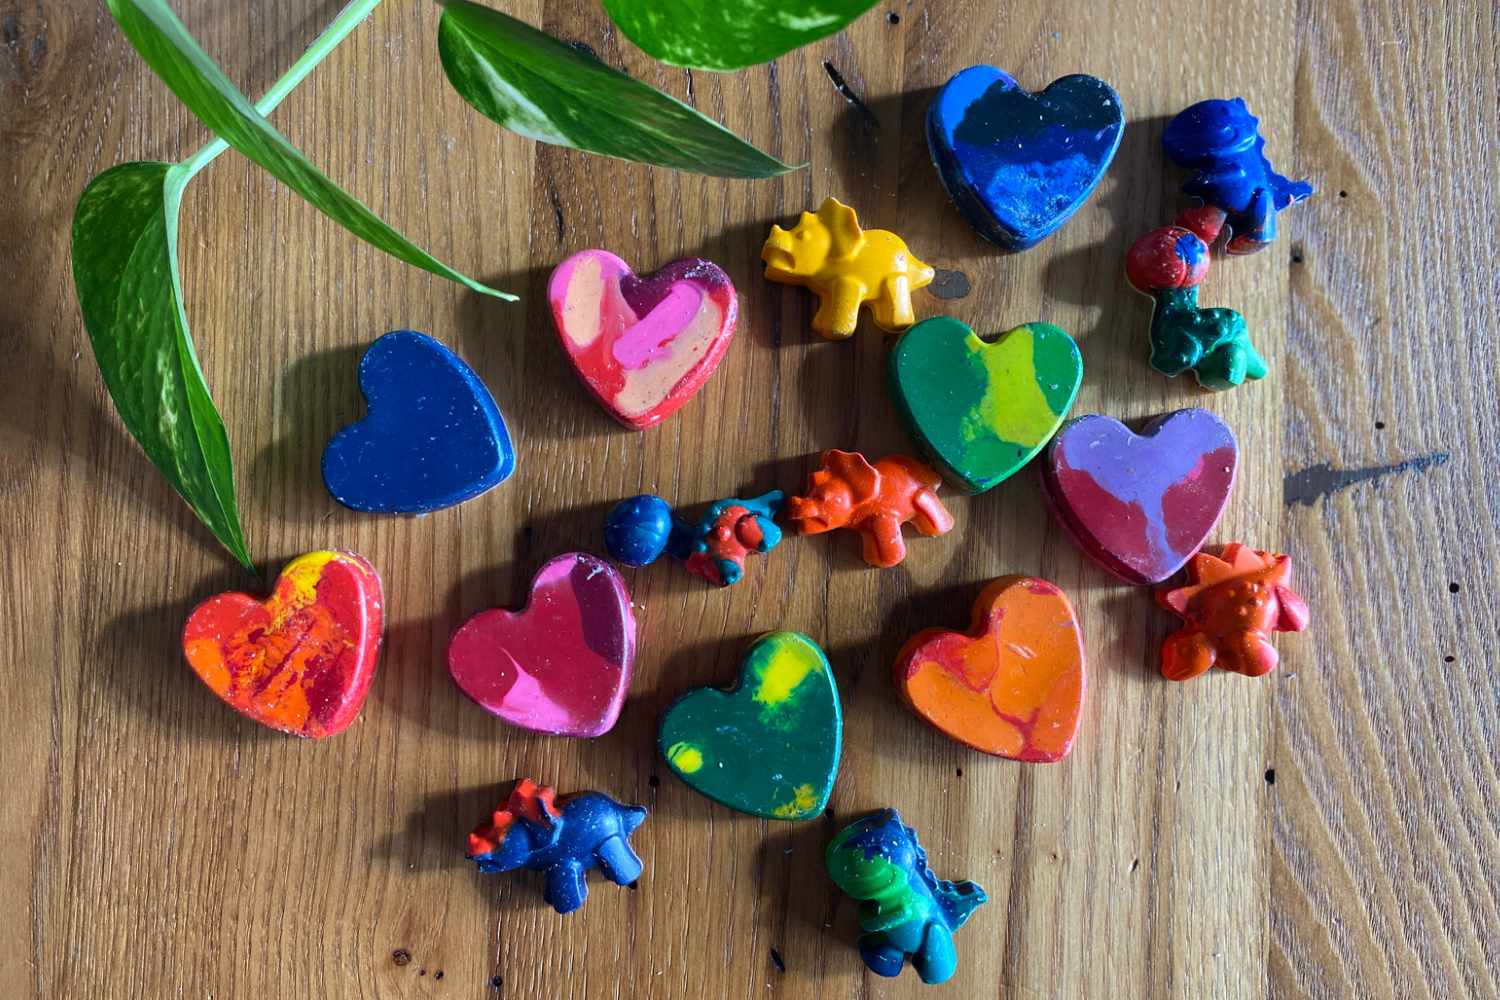 How to Upcycle Old Crayons into Valentine’s Day Party Favors for Kids + Free Valentine Printables